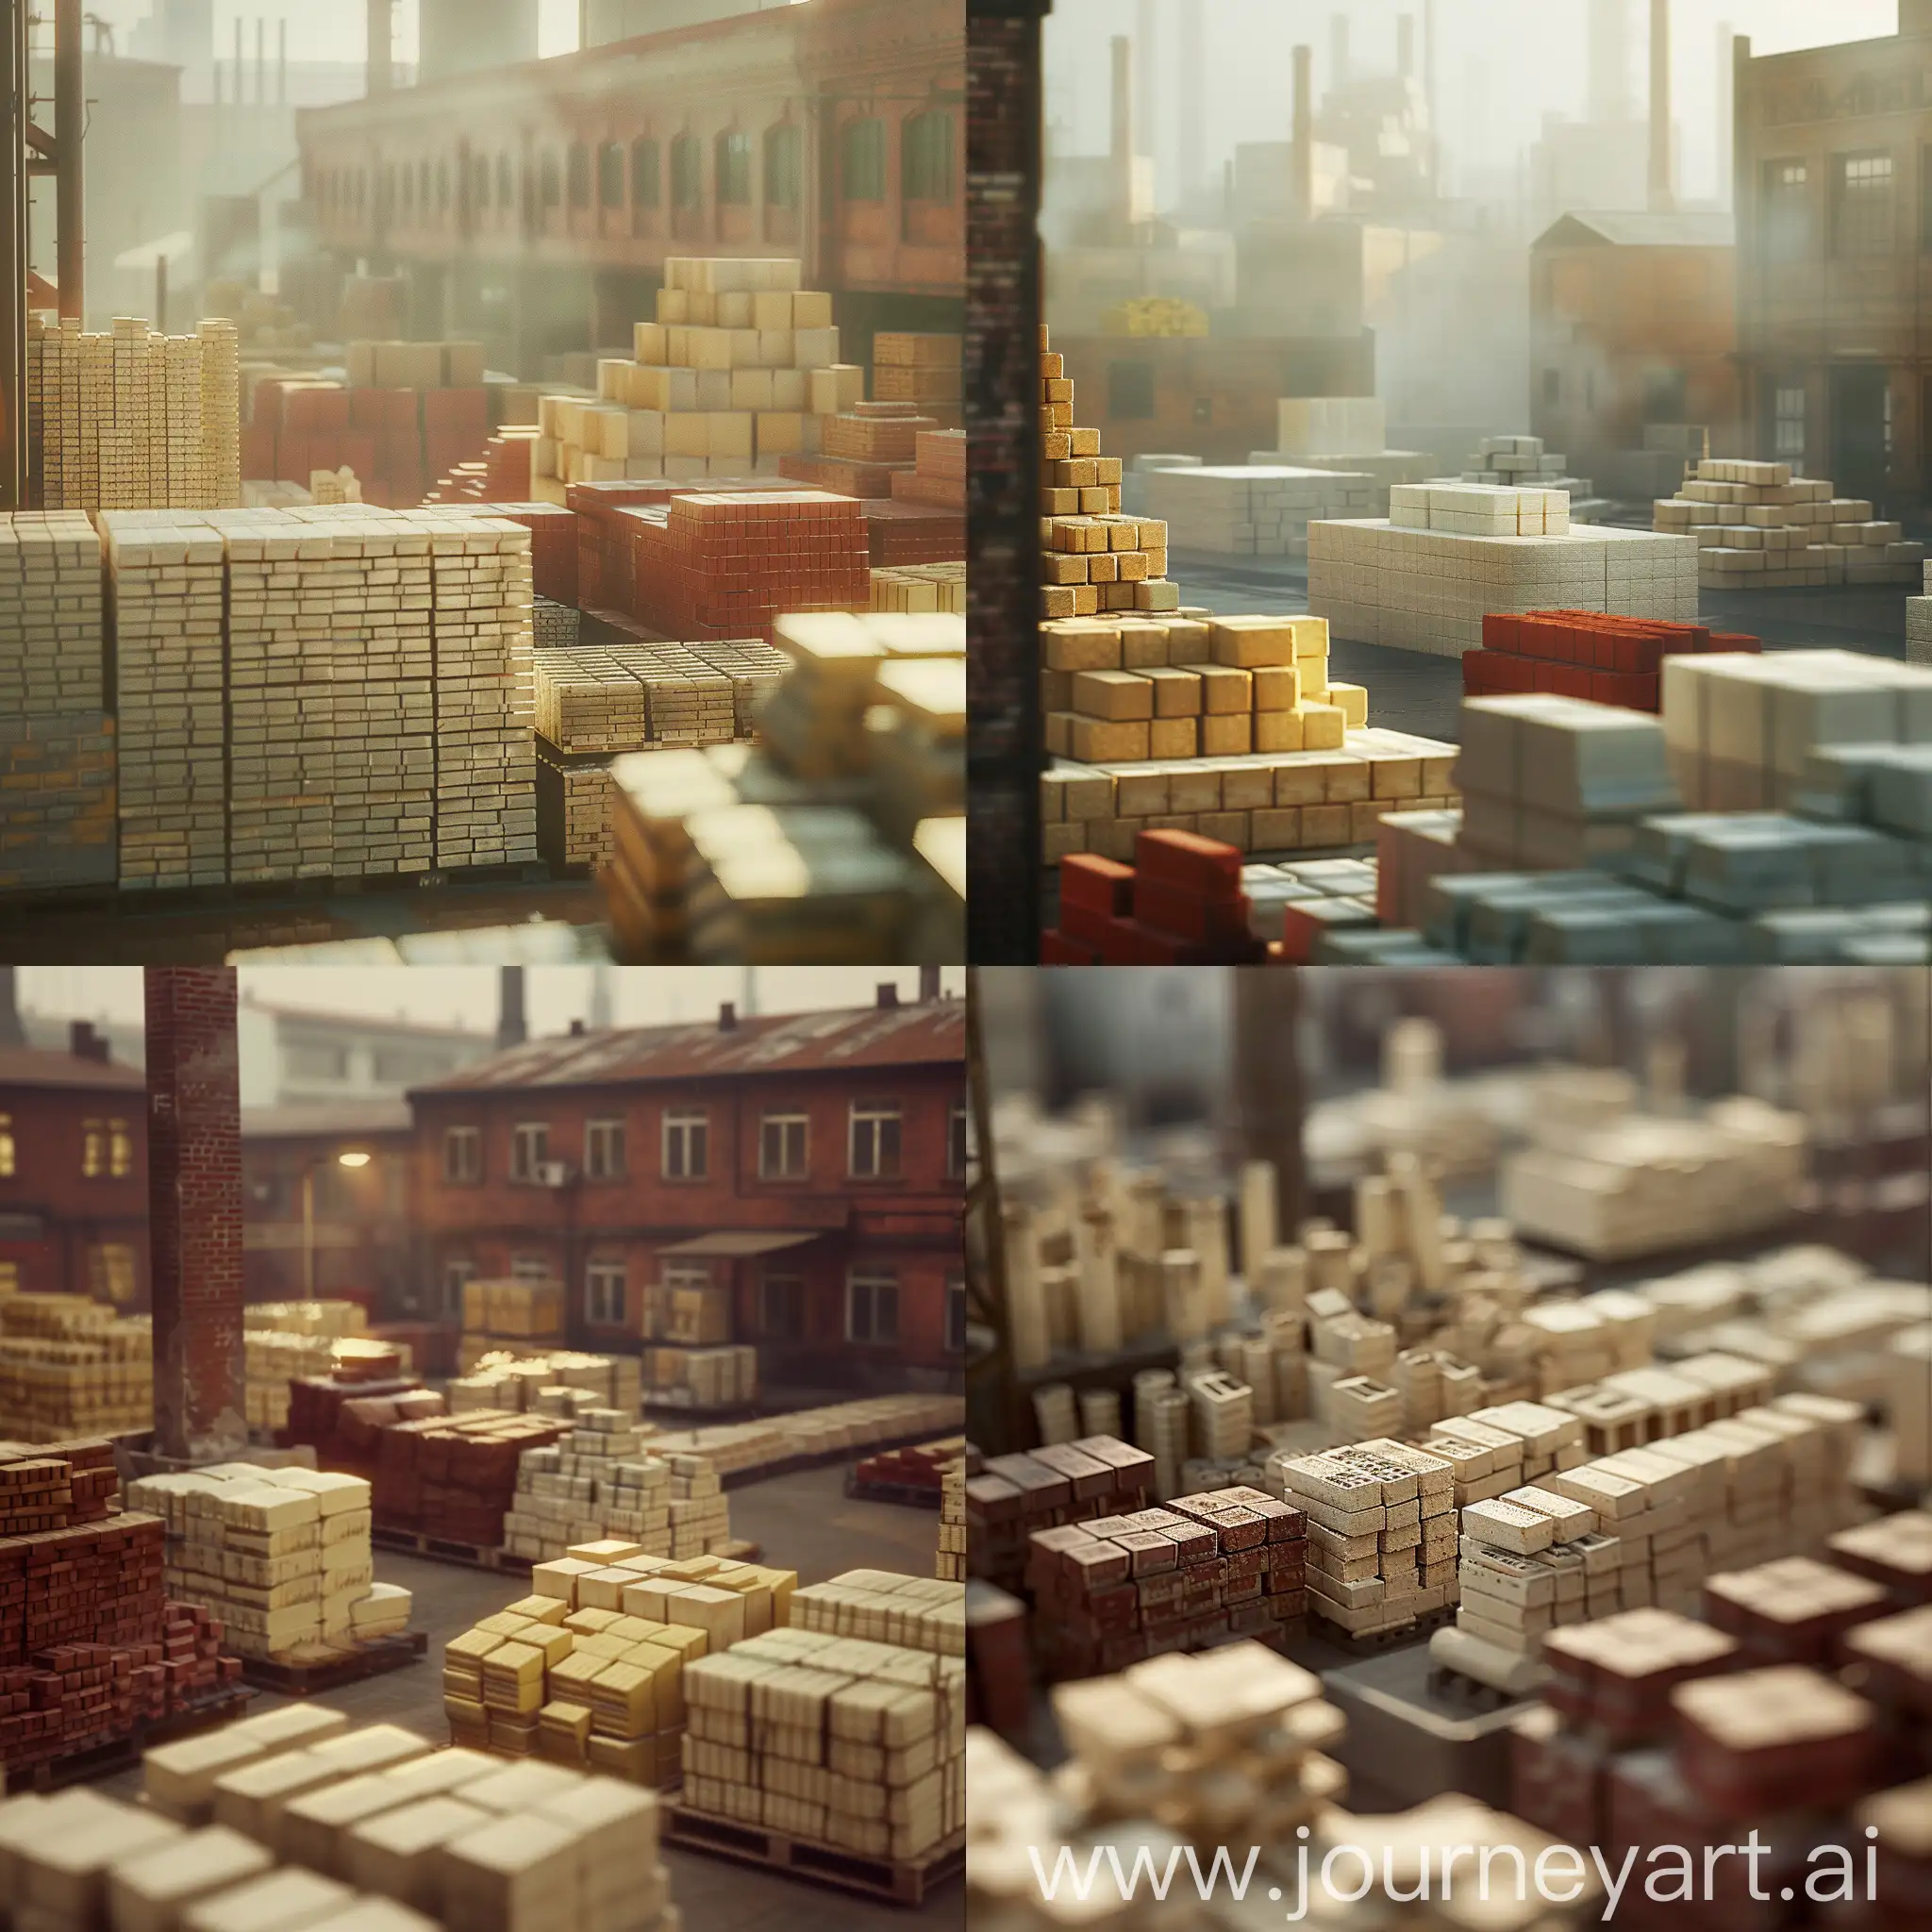 a picture of a brick factory from medium level height, contains the factory and some stacks of creamish-yellowish color bricks and some stacks of redish color bricks, soft lighting, a bit less brightness